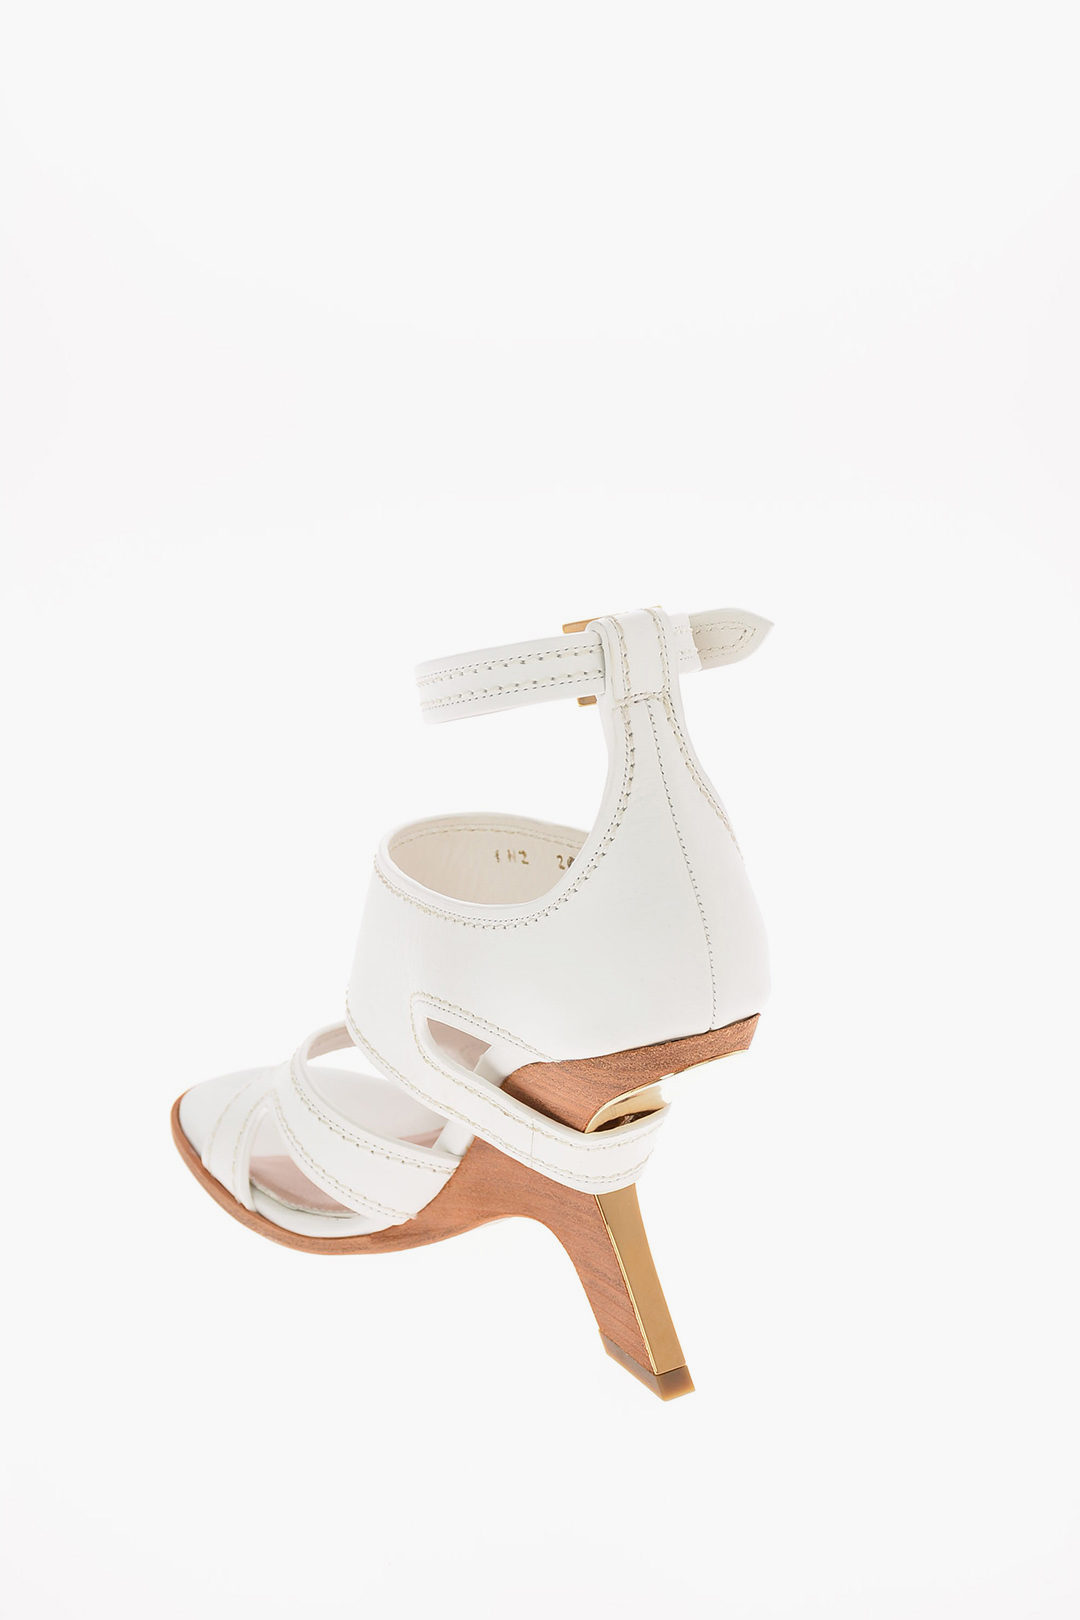 Leather heels Alexander McQueen White size 38 EU in Leather - 35135645